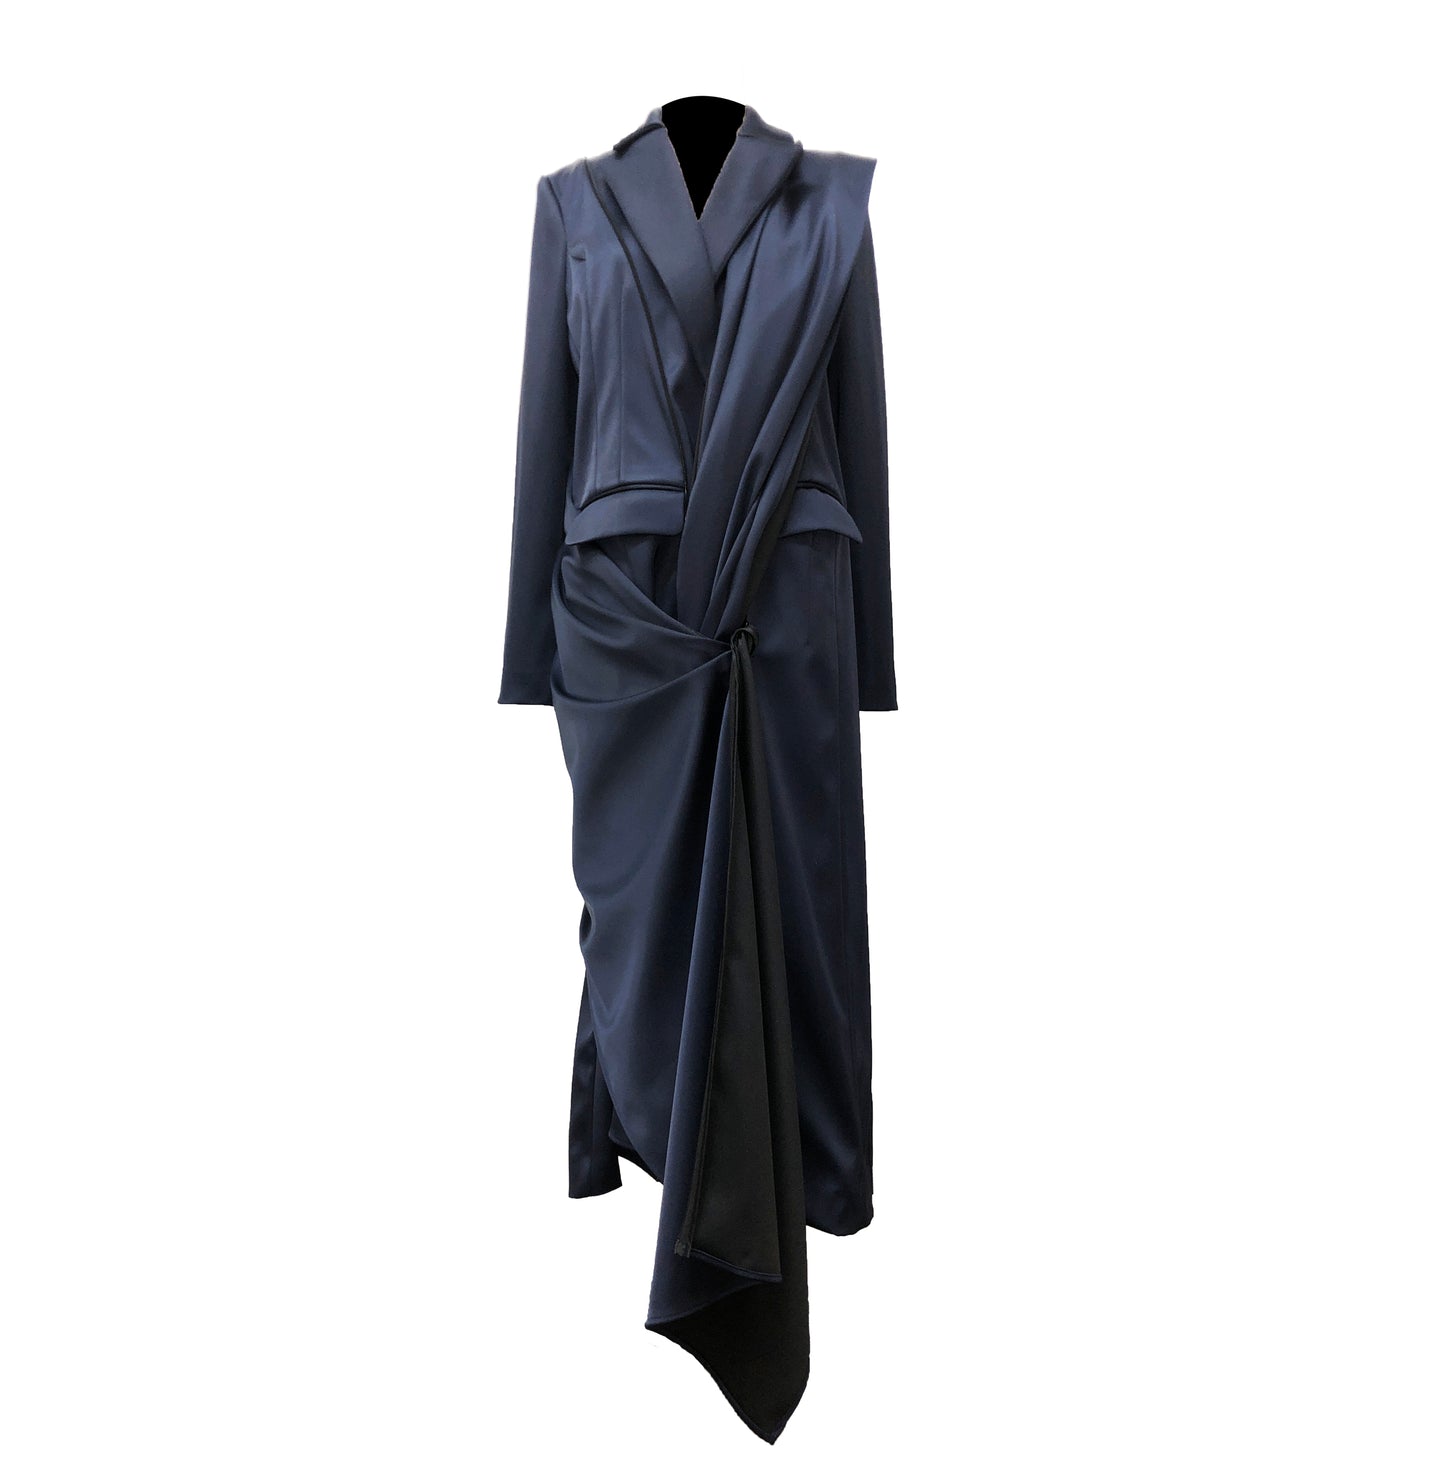 Front of navy stretch satin coat with transformable zippers and self tie belt with draped detail